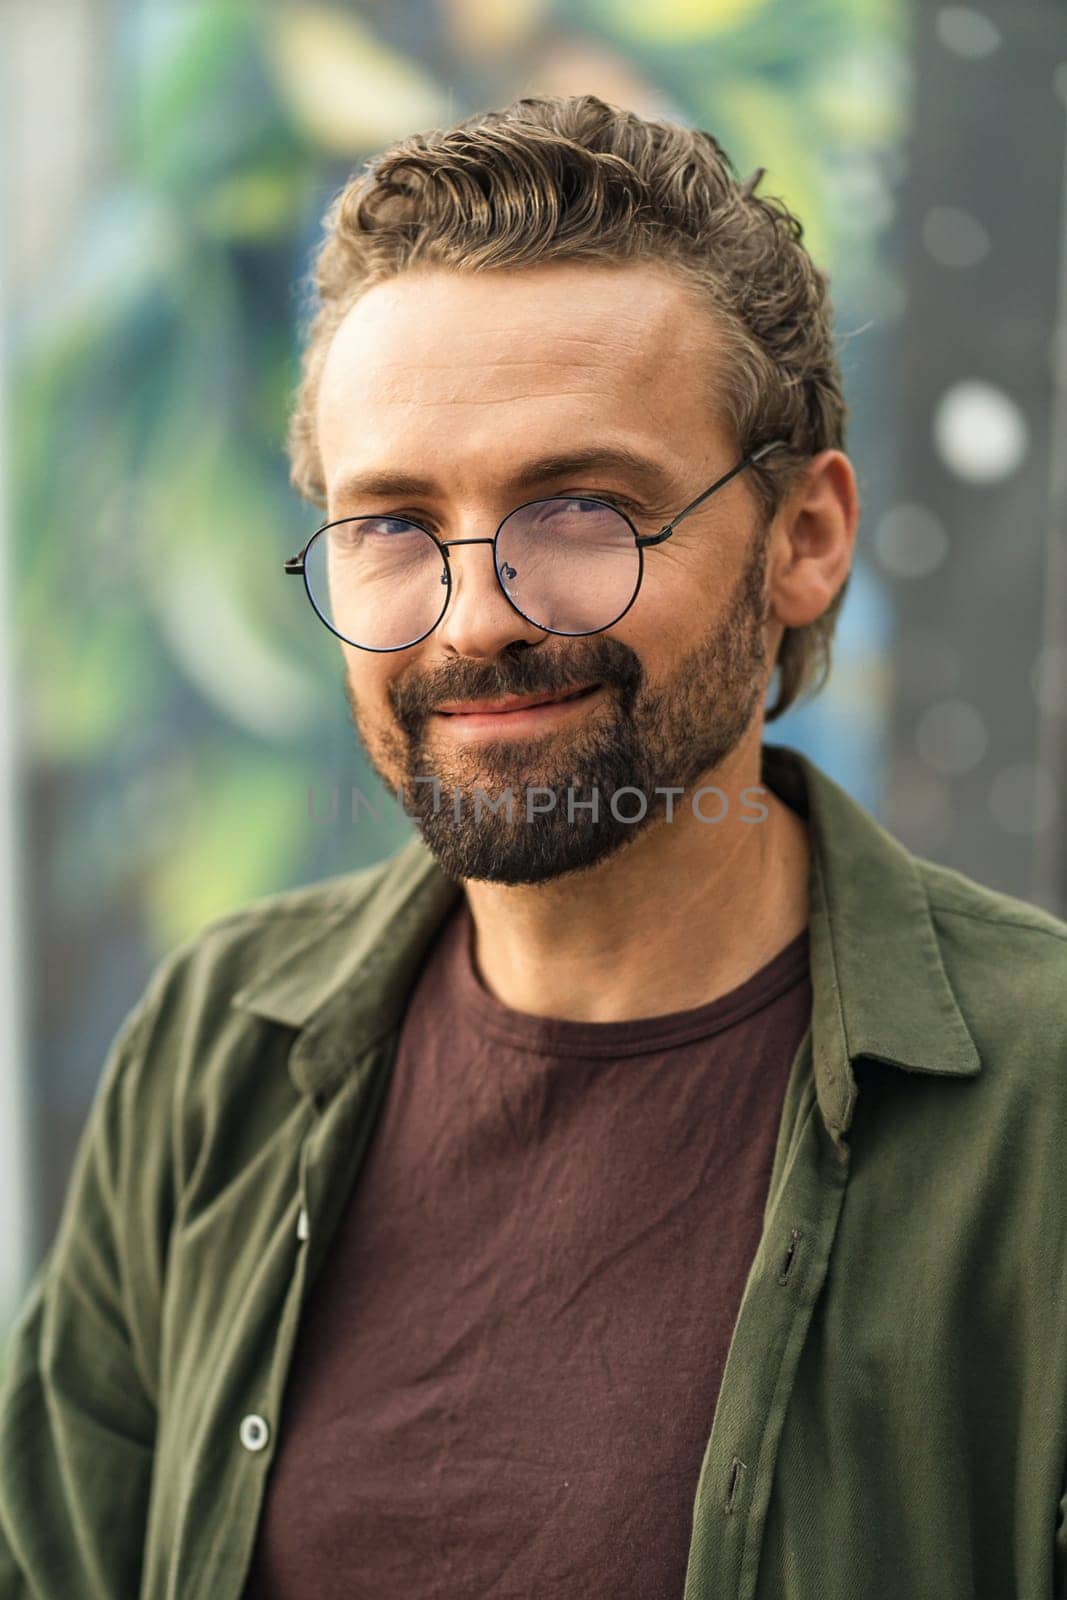 Handsome individual wearing glasses, situated outdoors against a graffiti-covered background. With a stylish and confident appearance, the subject exudes a modern and trendy vibe. . High quality photo